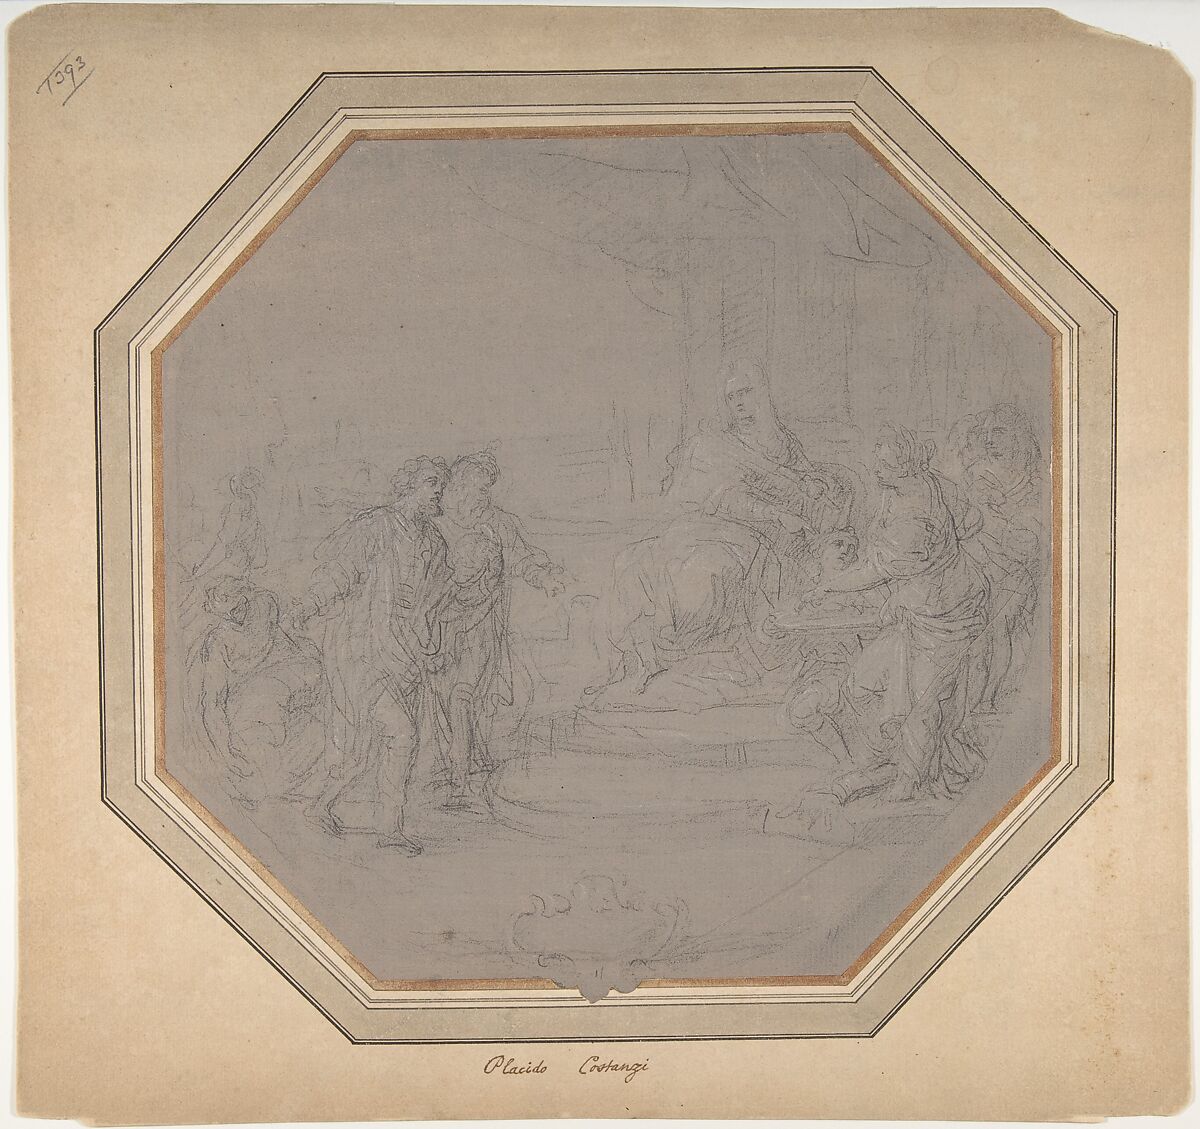 Unidentified Subject, Placido Costanzi (Italian, Rome 1702–1759 Rome), Black chalk, highlighted with white, on gray-washed paper 